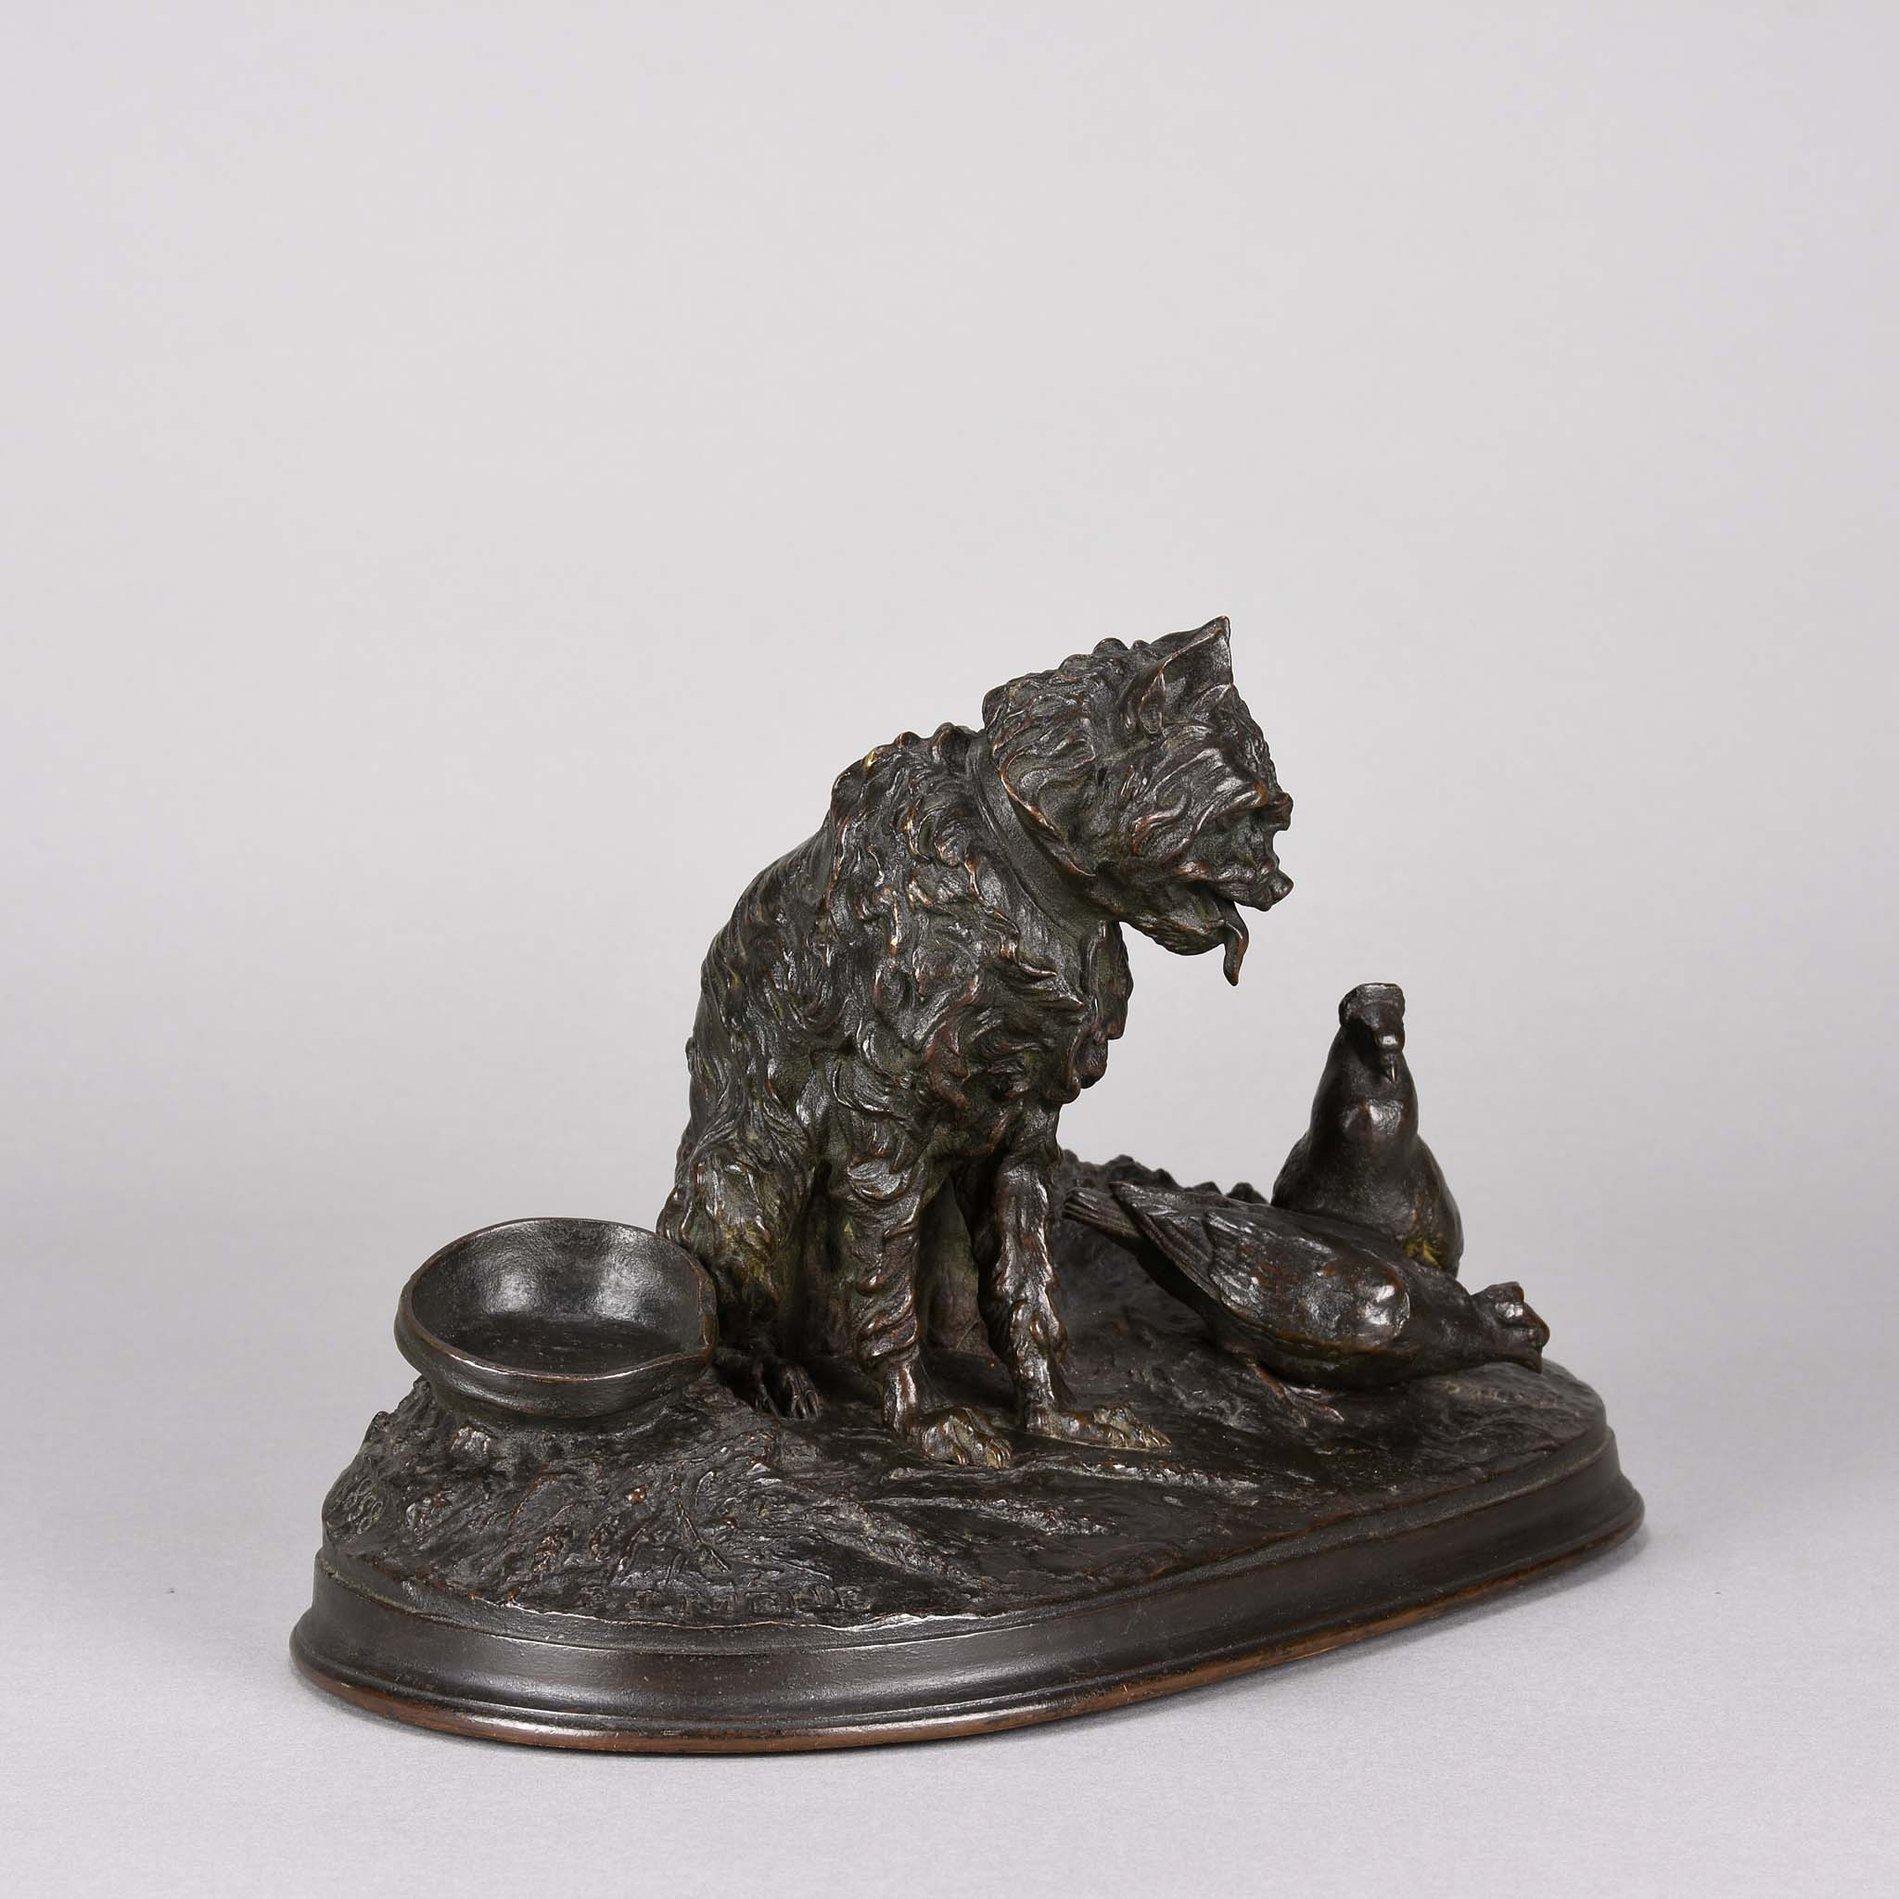 Excellent quality and very rare mid-19th century French Animalier bronze study of a seated griffon hound looking intently at two pigeons feeding beside him. The bronze with excellent hand chased surface detail and Fine rich black/brown patination.